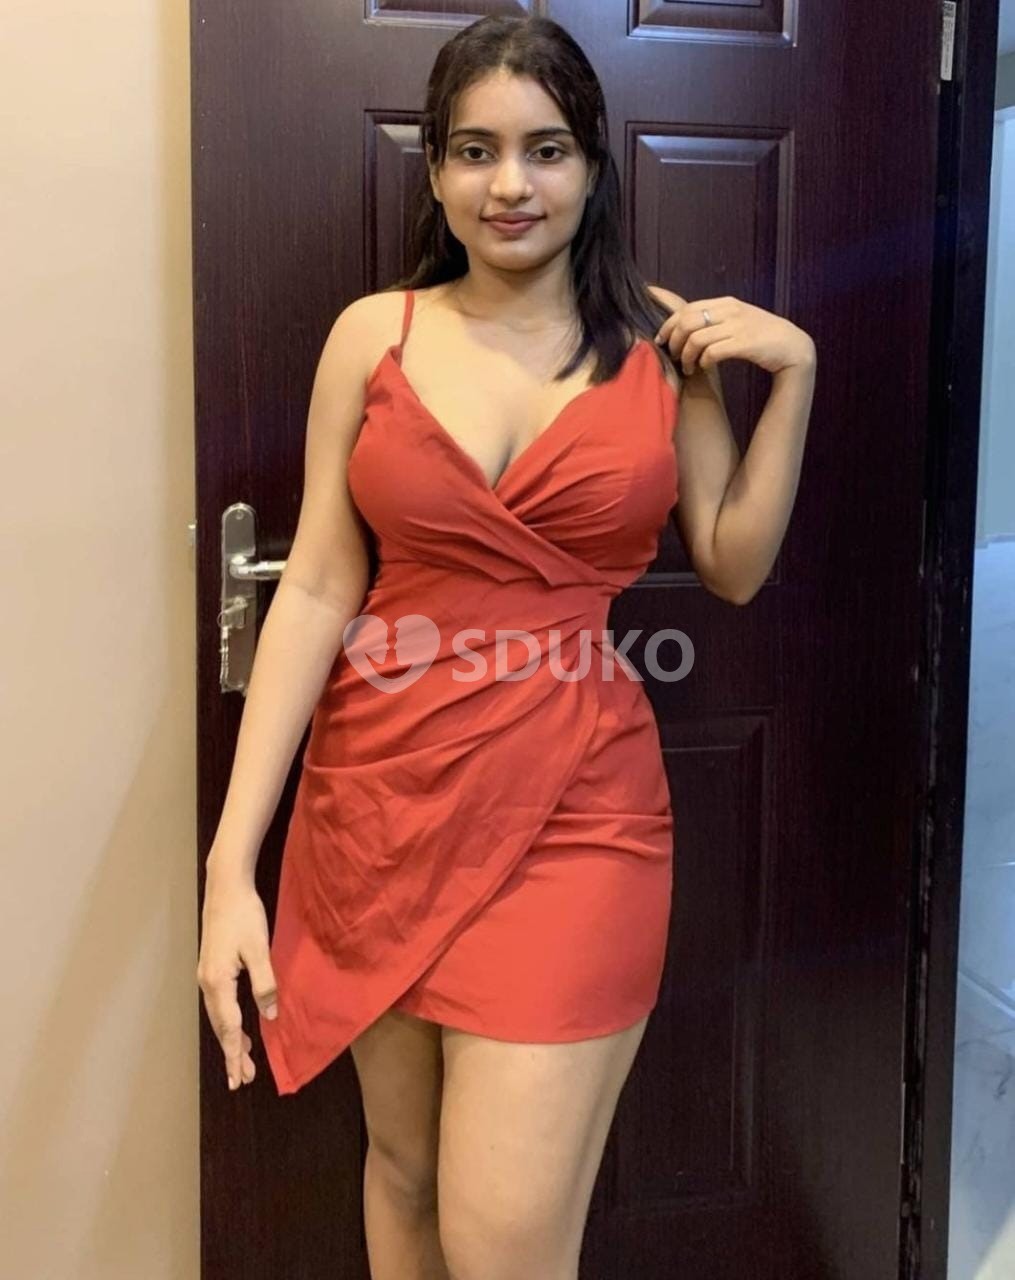 City Bathinda best call girl service available 24 hours full safe and secure